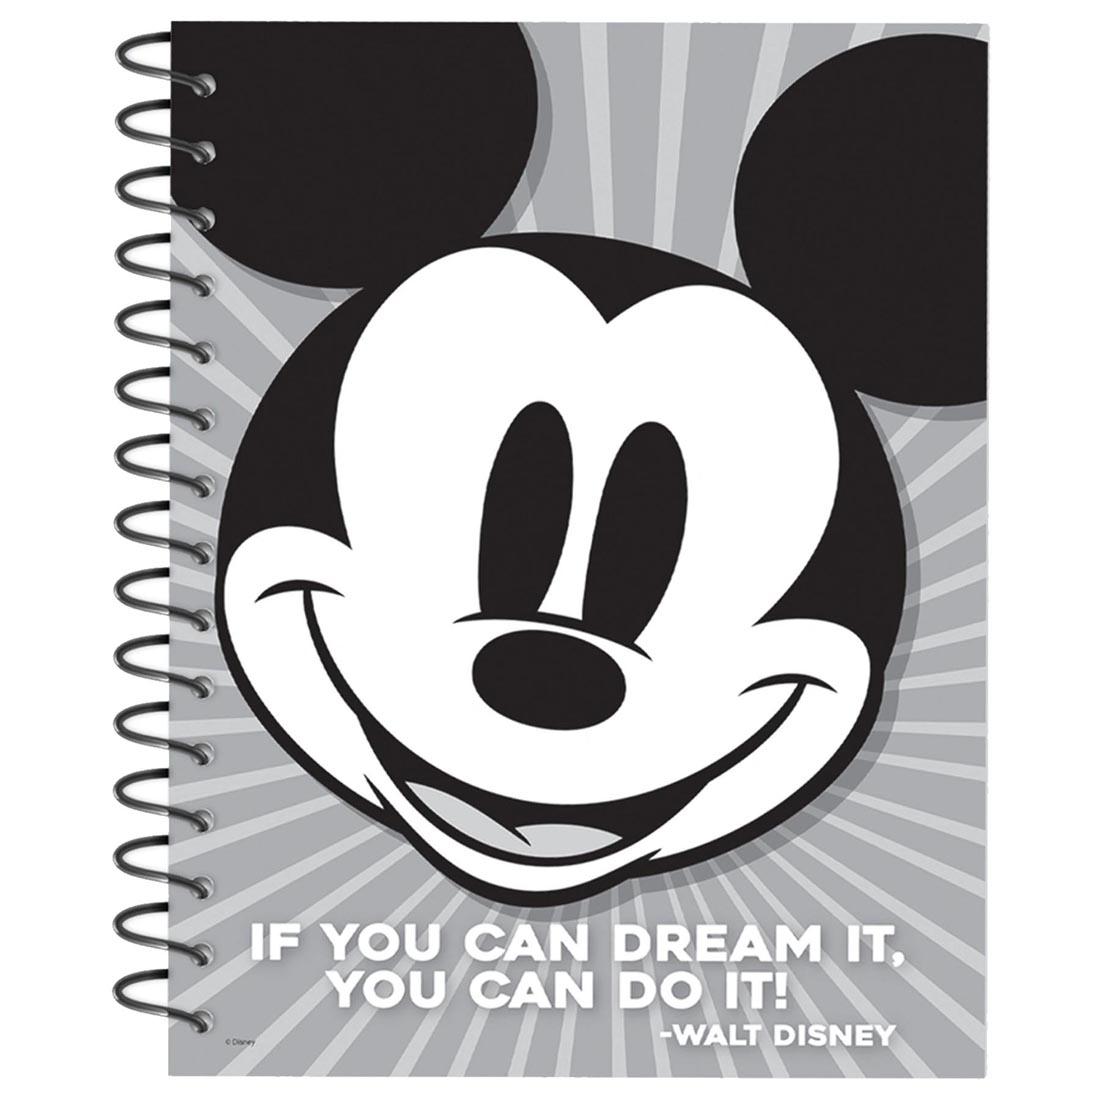 Front cover of Mickey Mouse Throwback Lesson Plan Book By Eureka that reads If You Can Dream It, You Can Do It! - Walt Disney